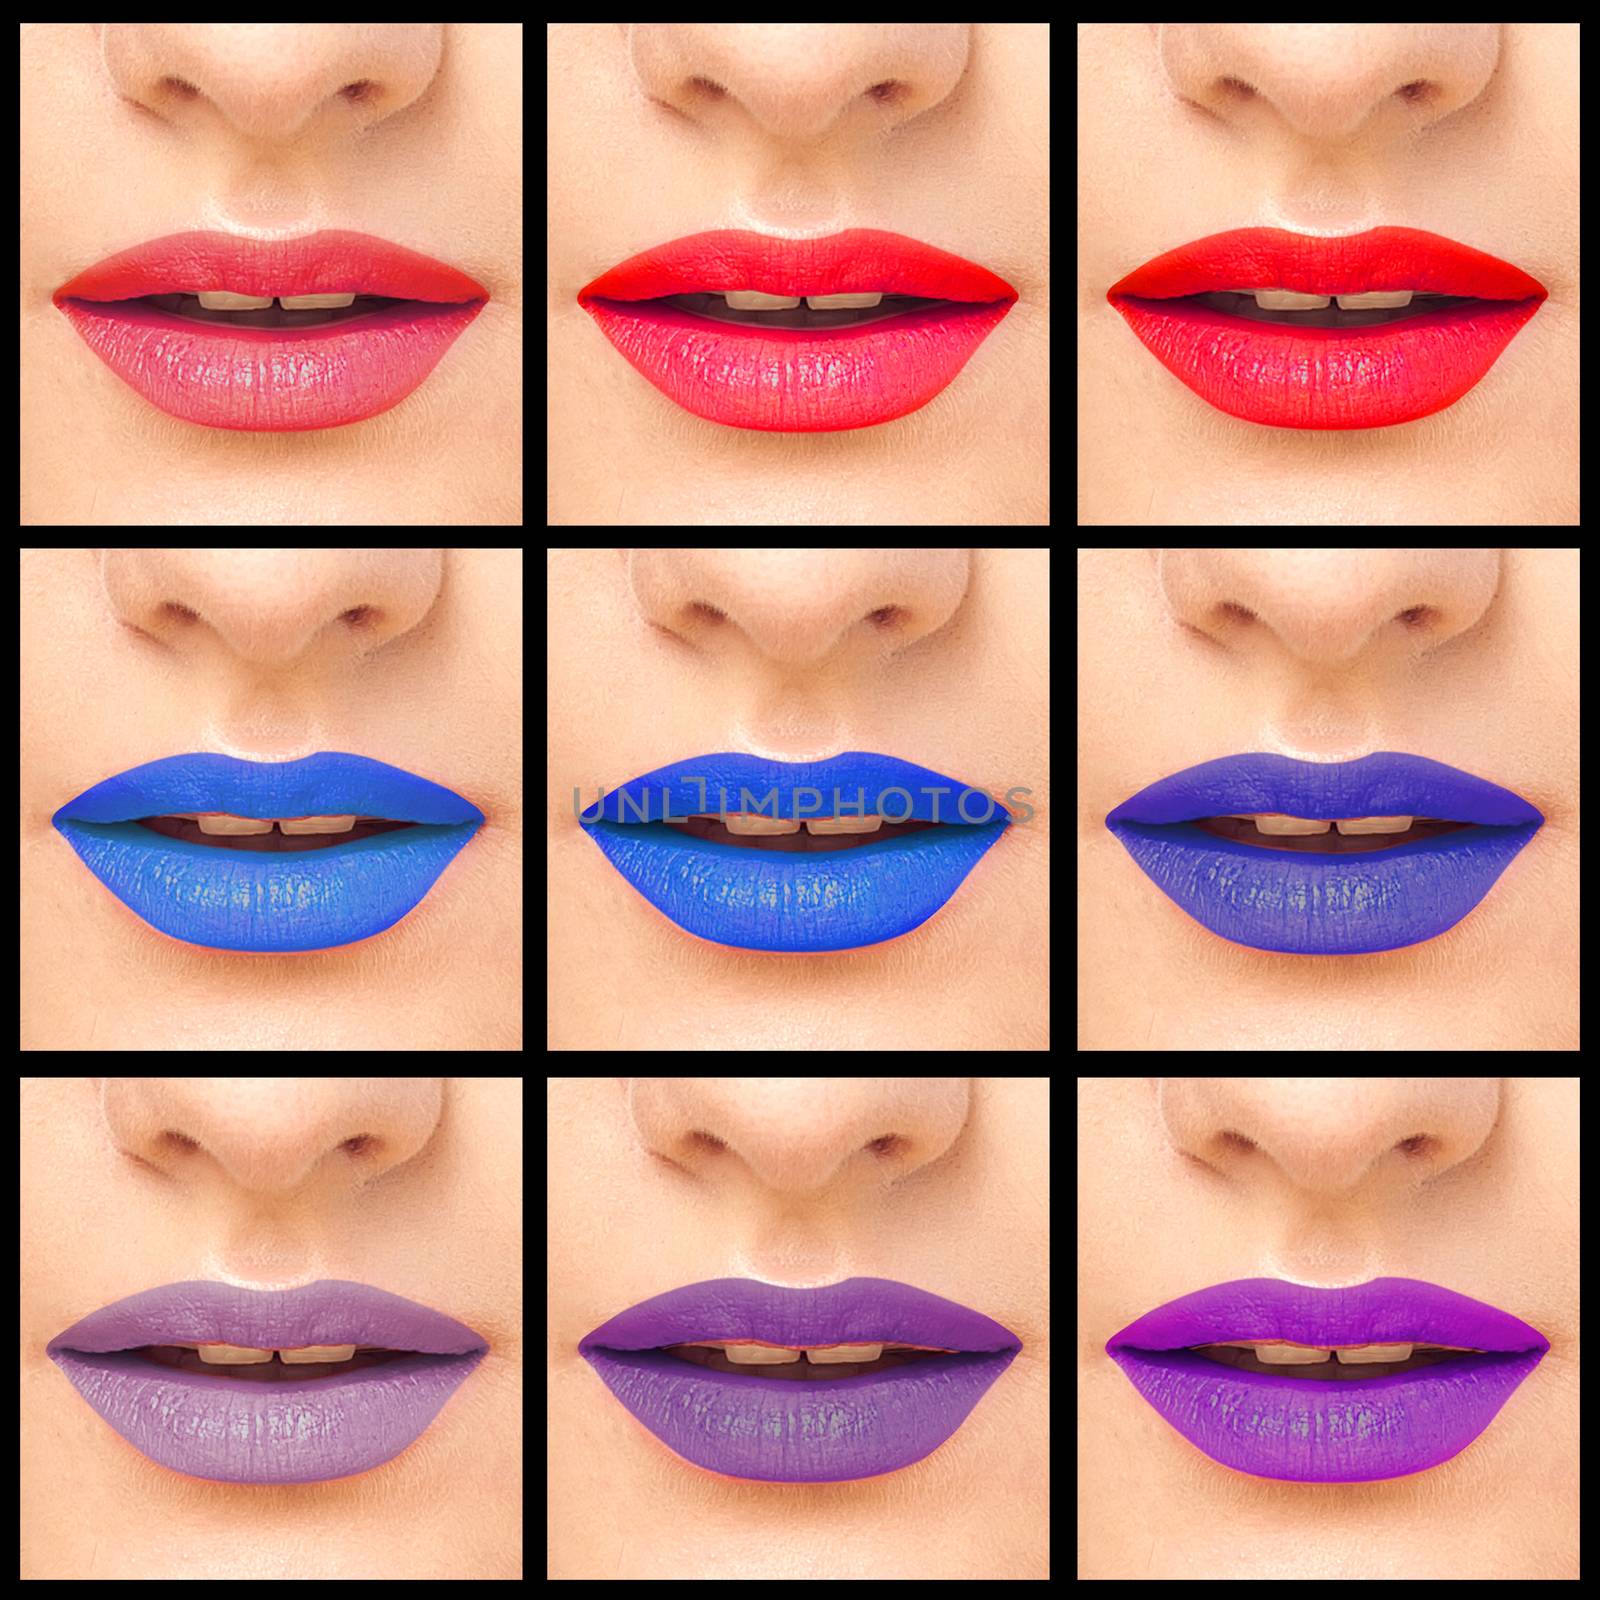 Collage close-up images of colorful woman lips